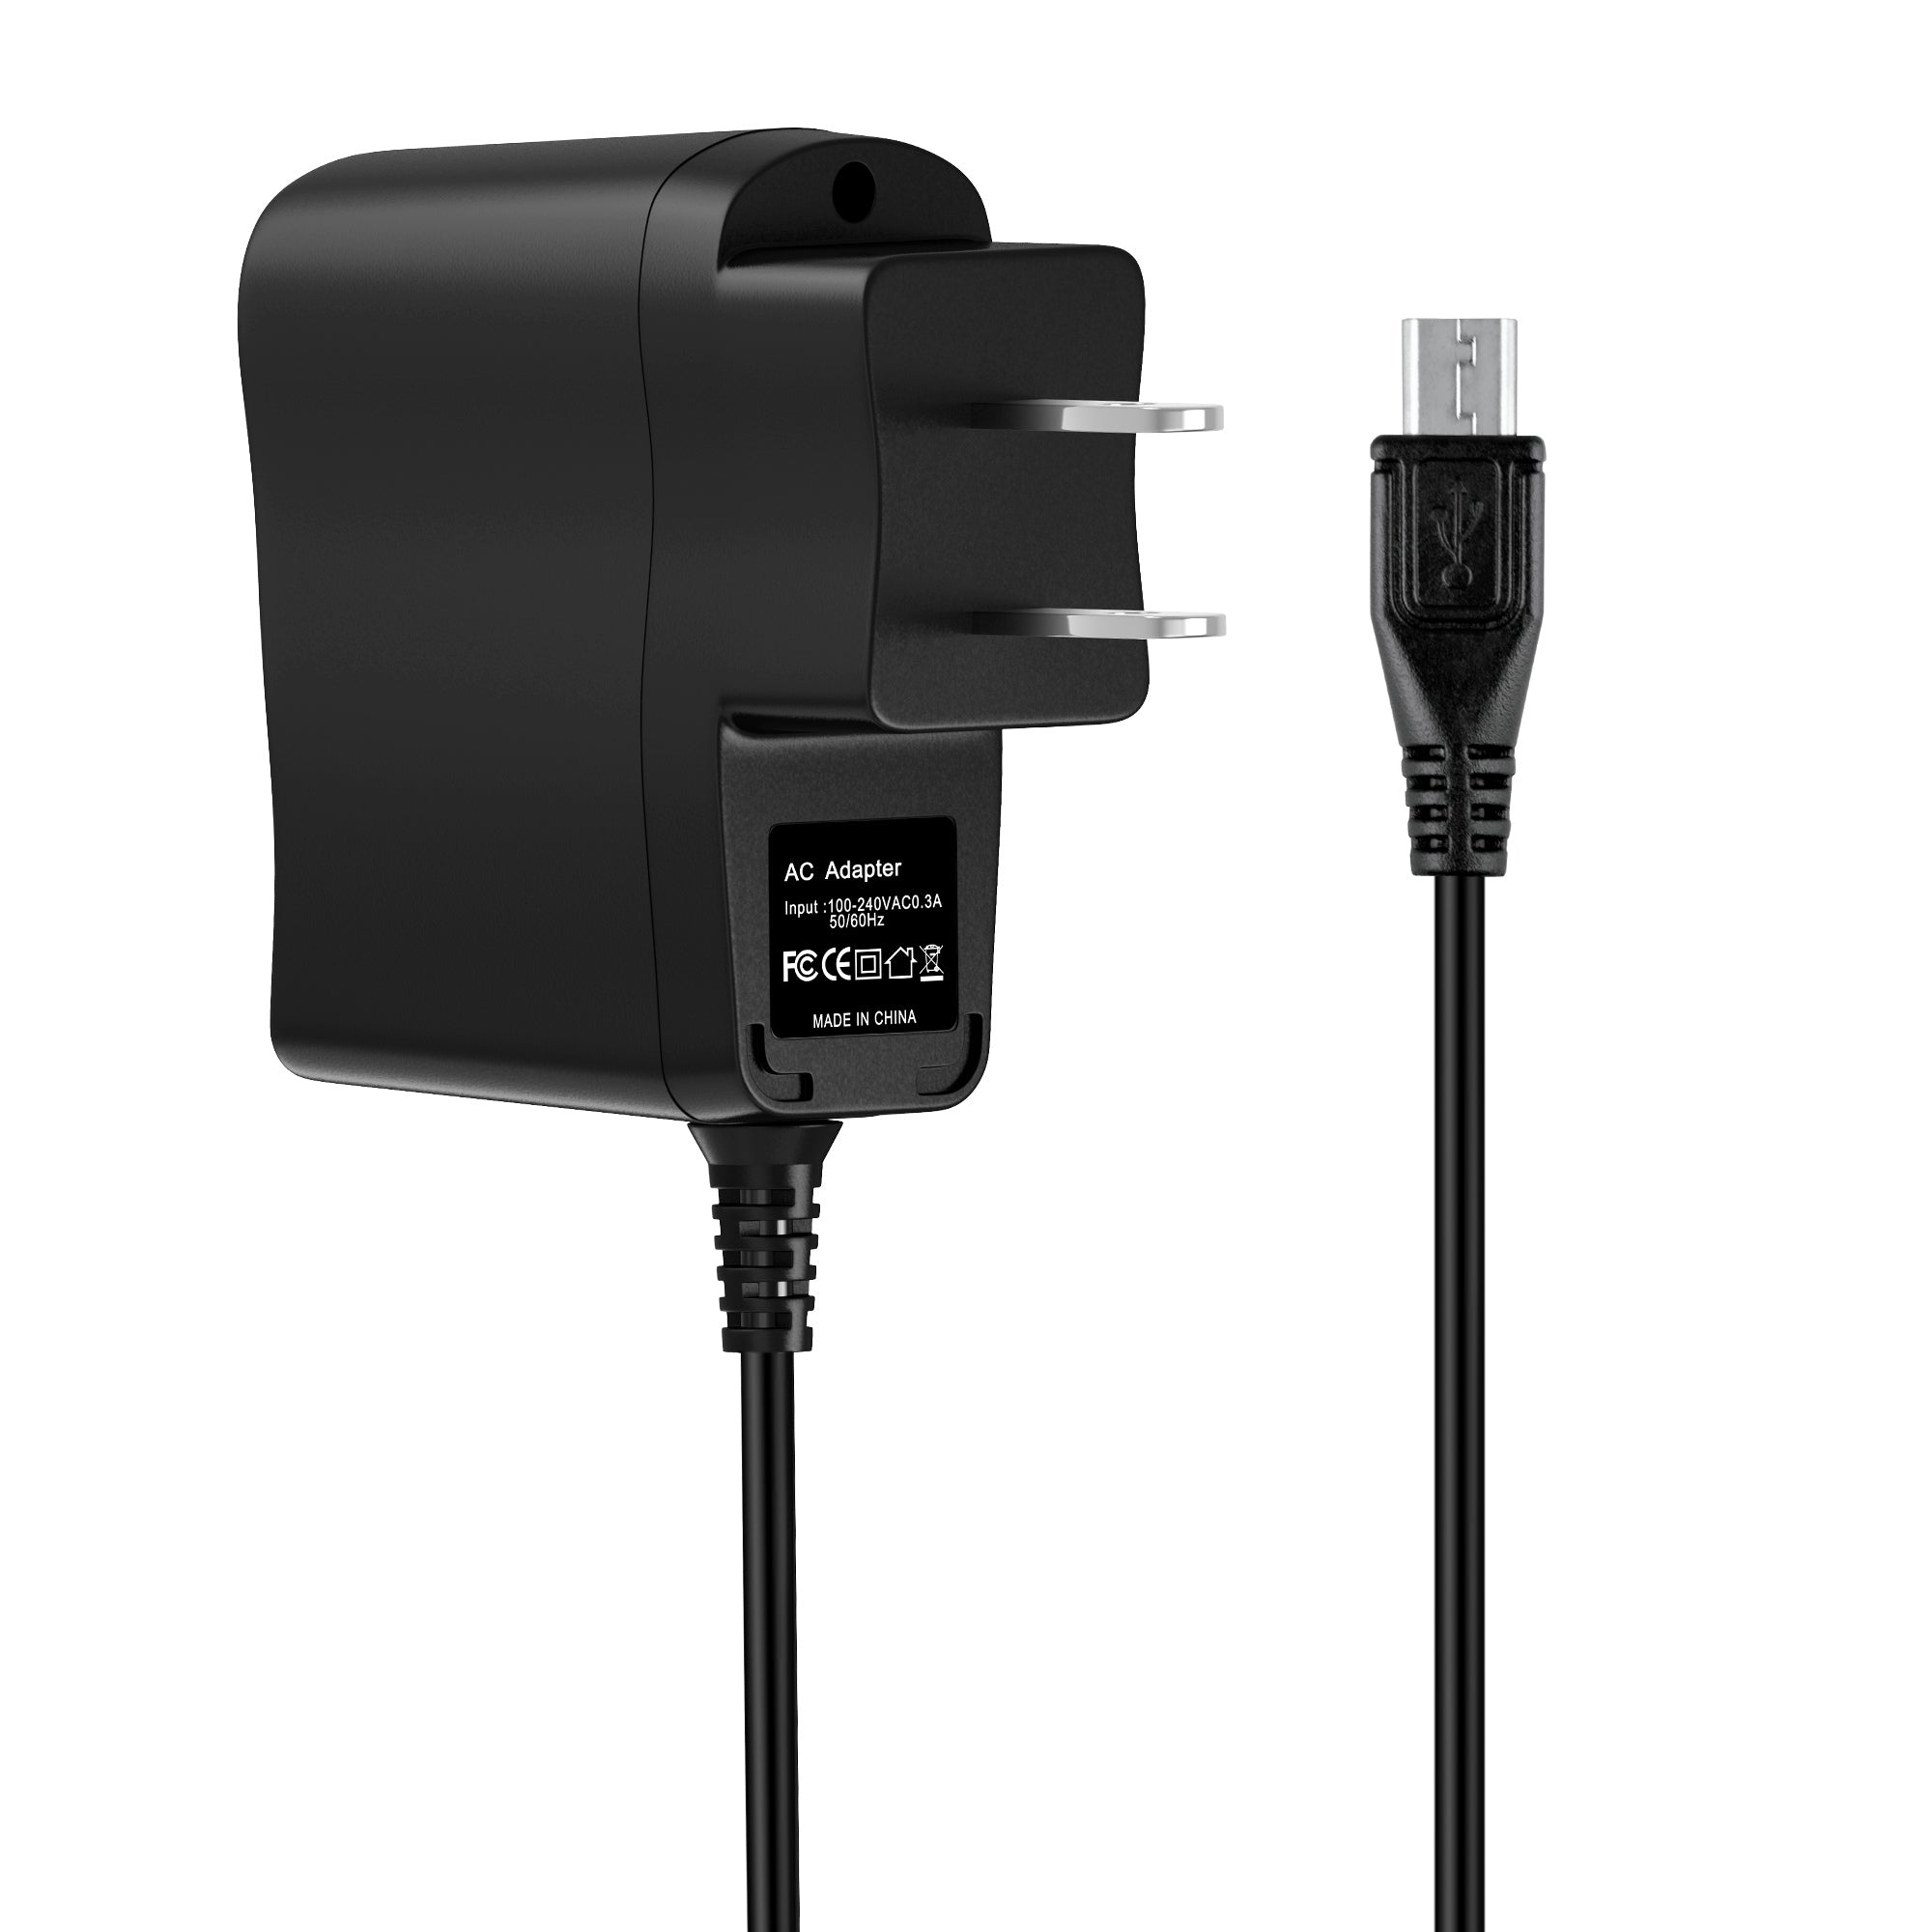 AbleGrid 1A AC Wall Power Charger Adapter Cord Compatible with Sprint Motorola Photon 4G MB855 Phone